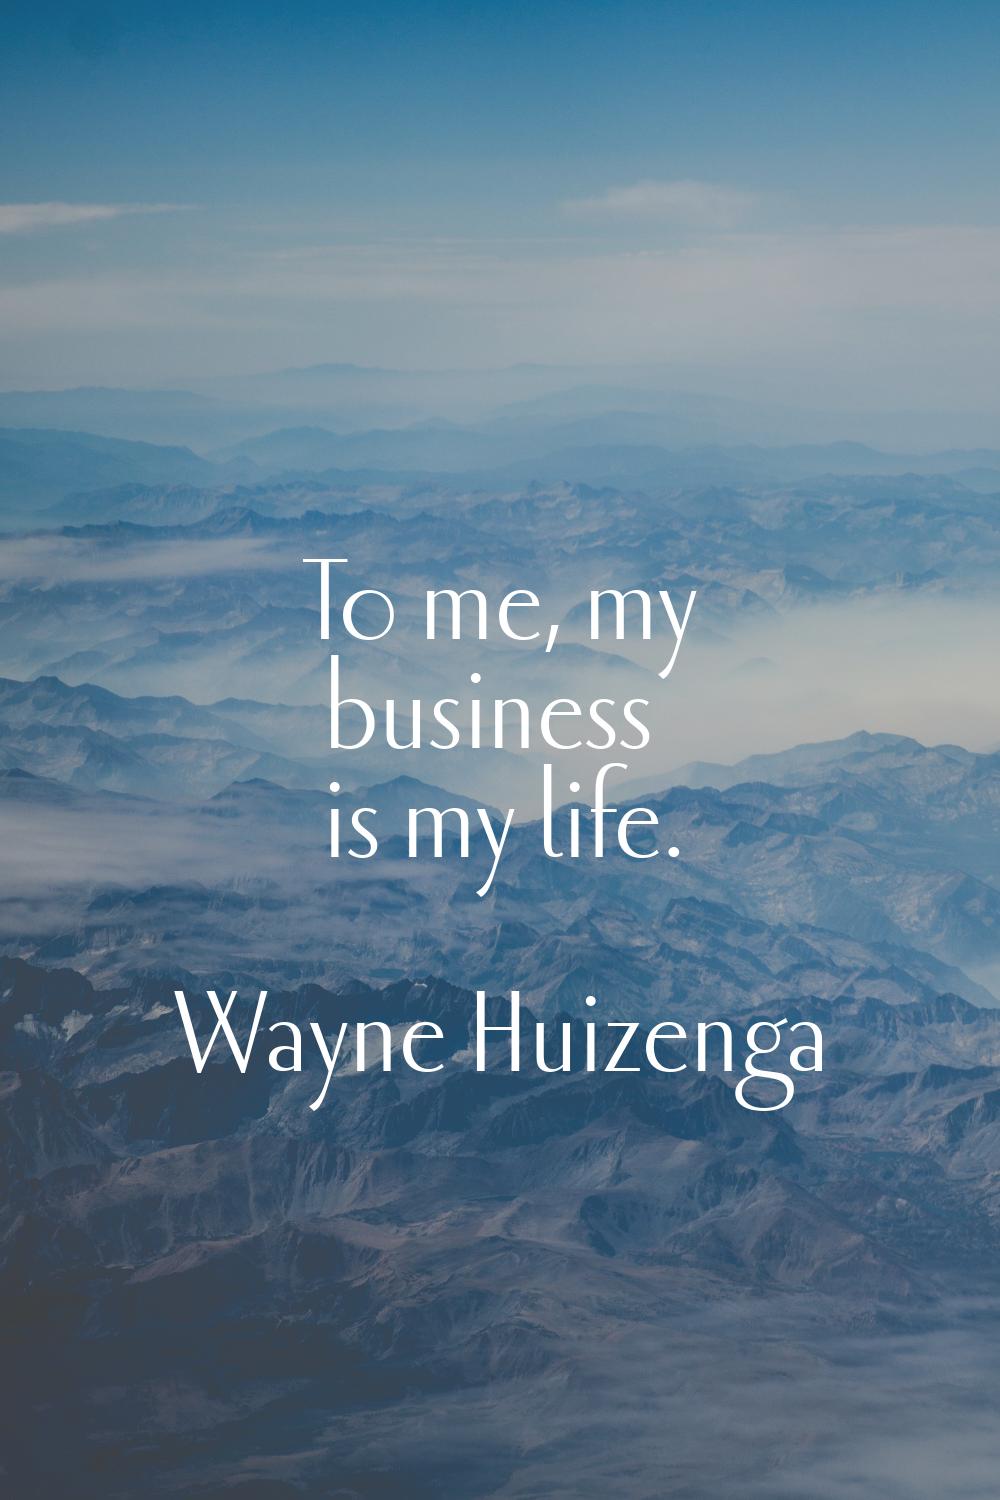 To me, my business is my life.